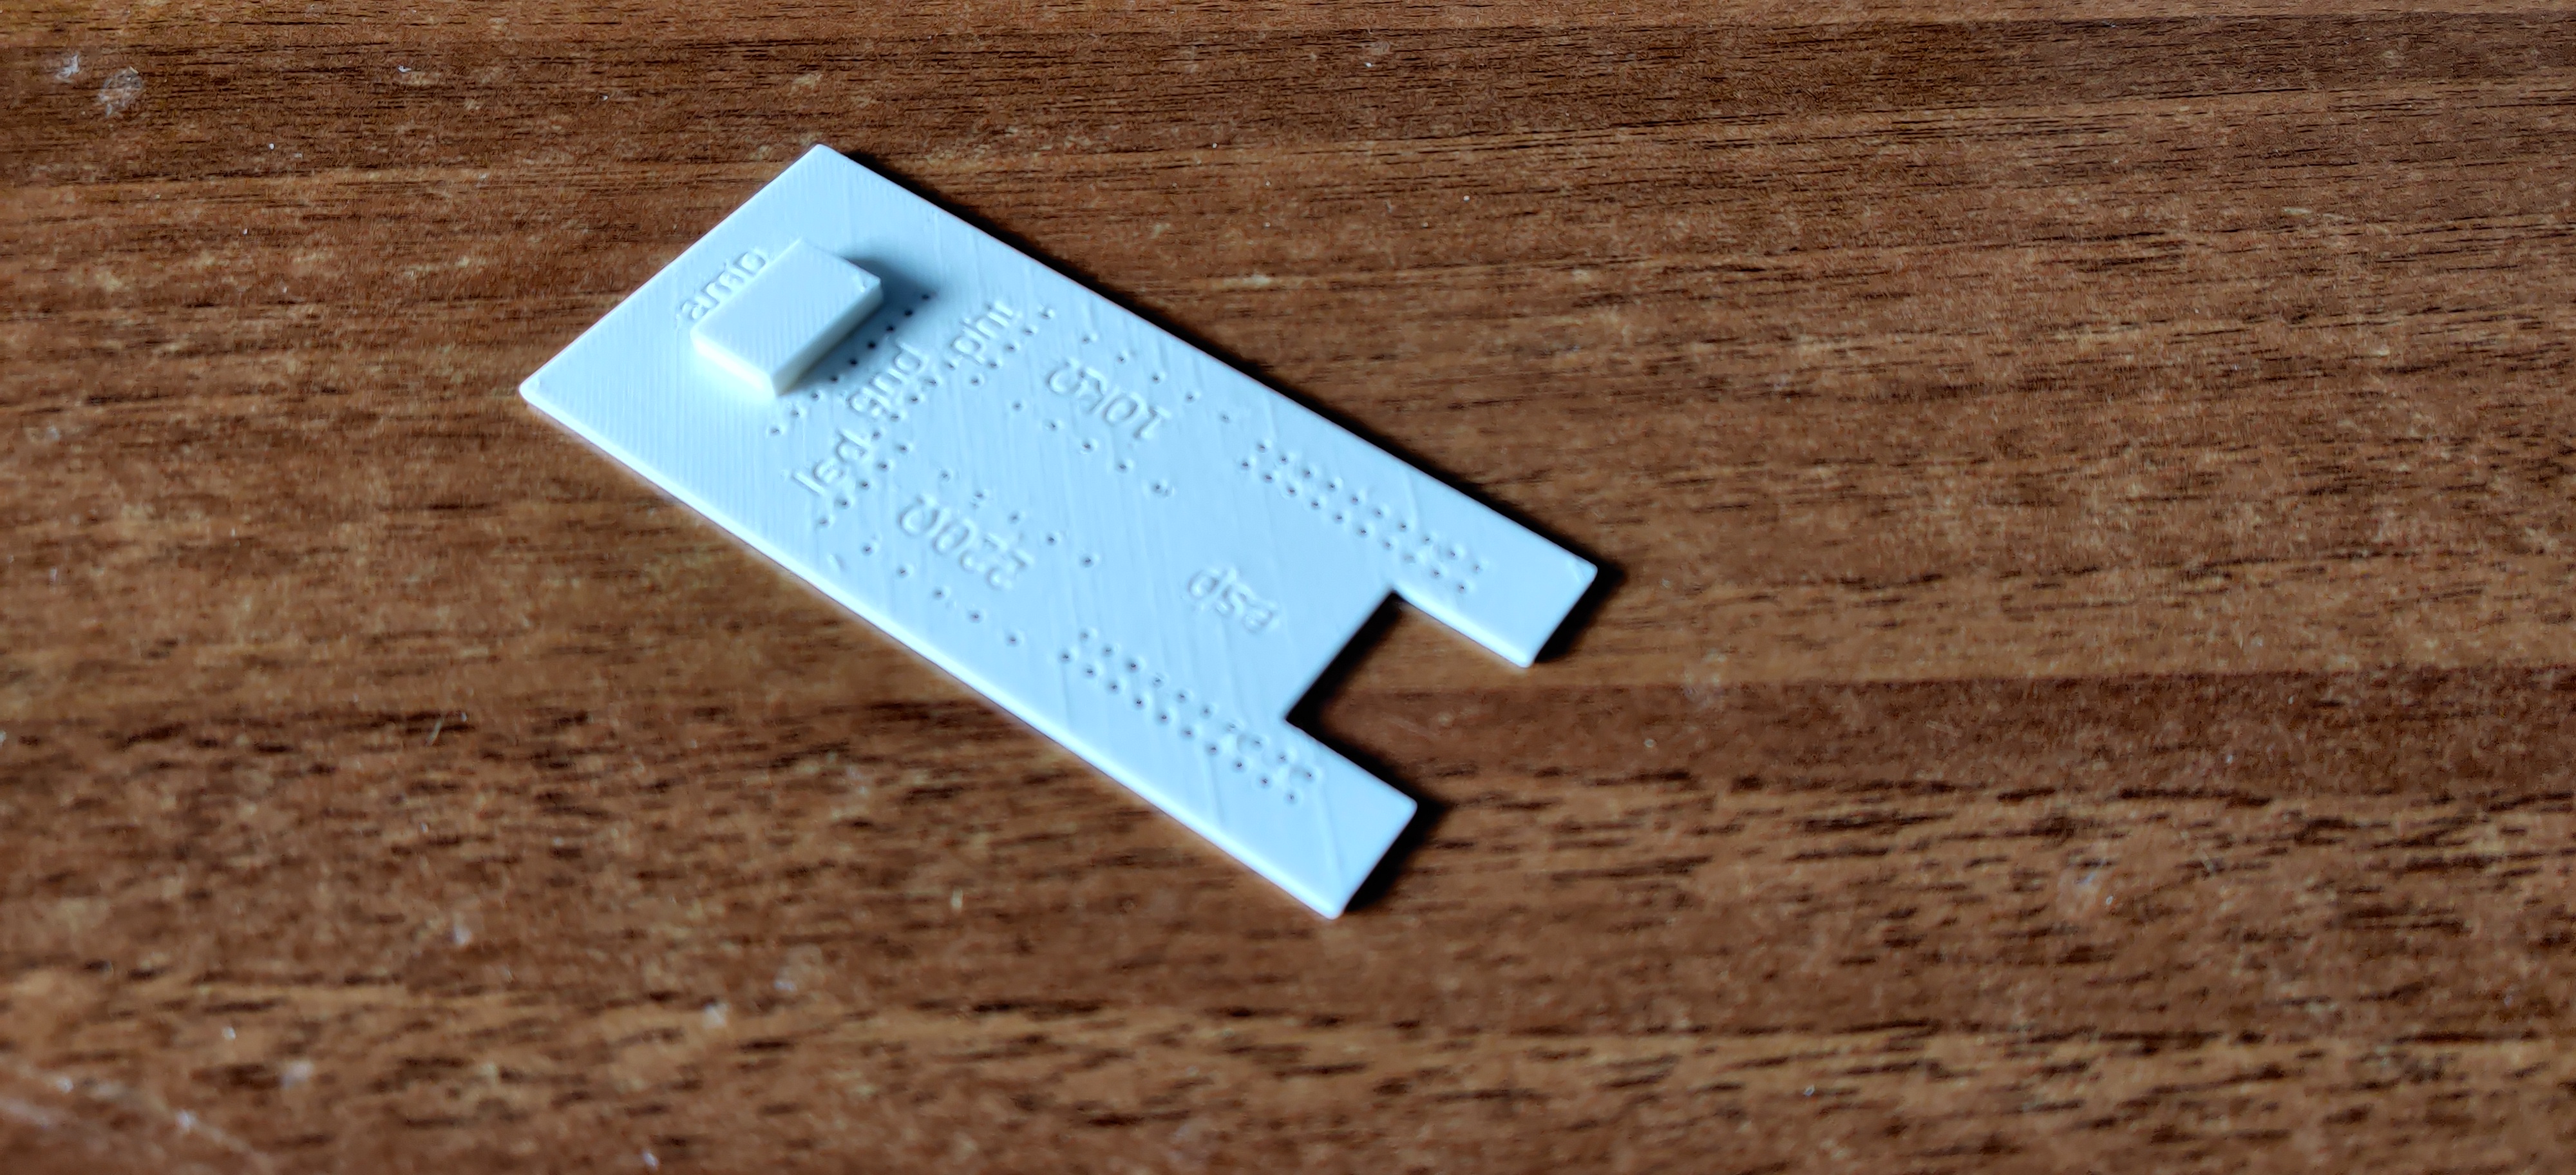 white plastic 3D-printed rectangle, with two groups of 10x2
holes around a label "esp", two groups of 5×2 holes around
labels "220Ω" and "10kΩ", three groups of 5 holes beside
labels "led", "gnd", "pht", and one group of 9 holes beside a
label "amp"; there is a notch in the rectangle near the "esp"
label, and a small raised block near the "amp" label